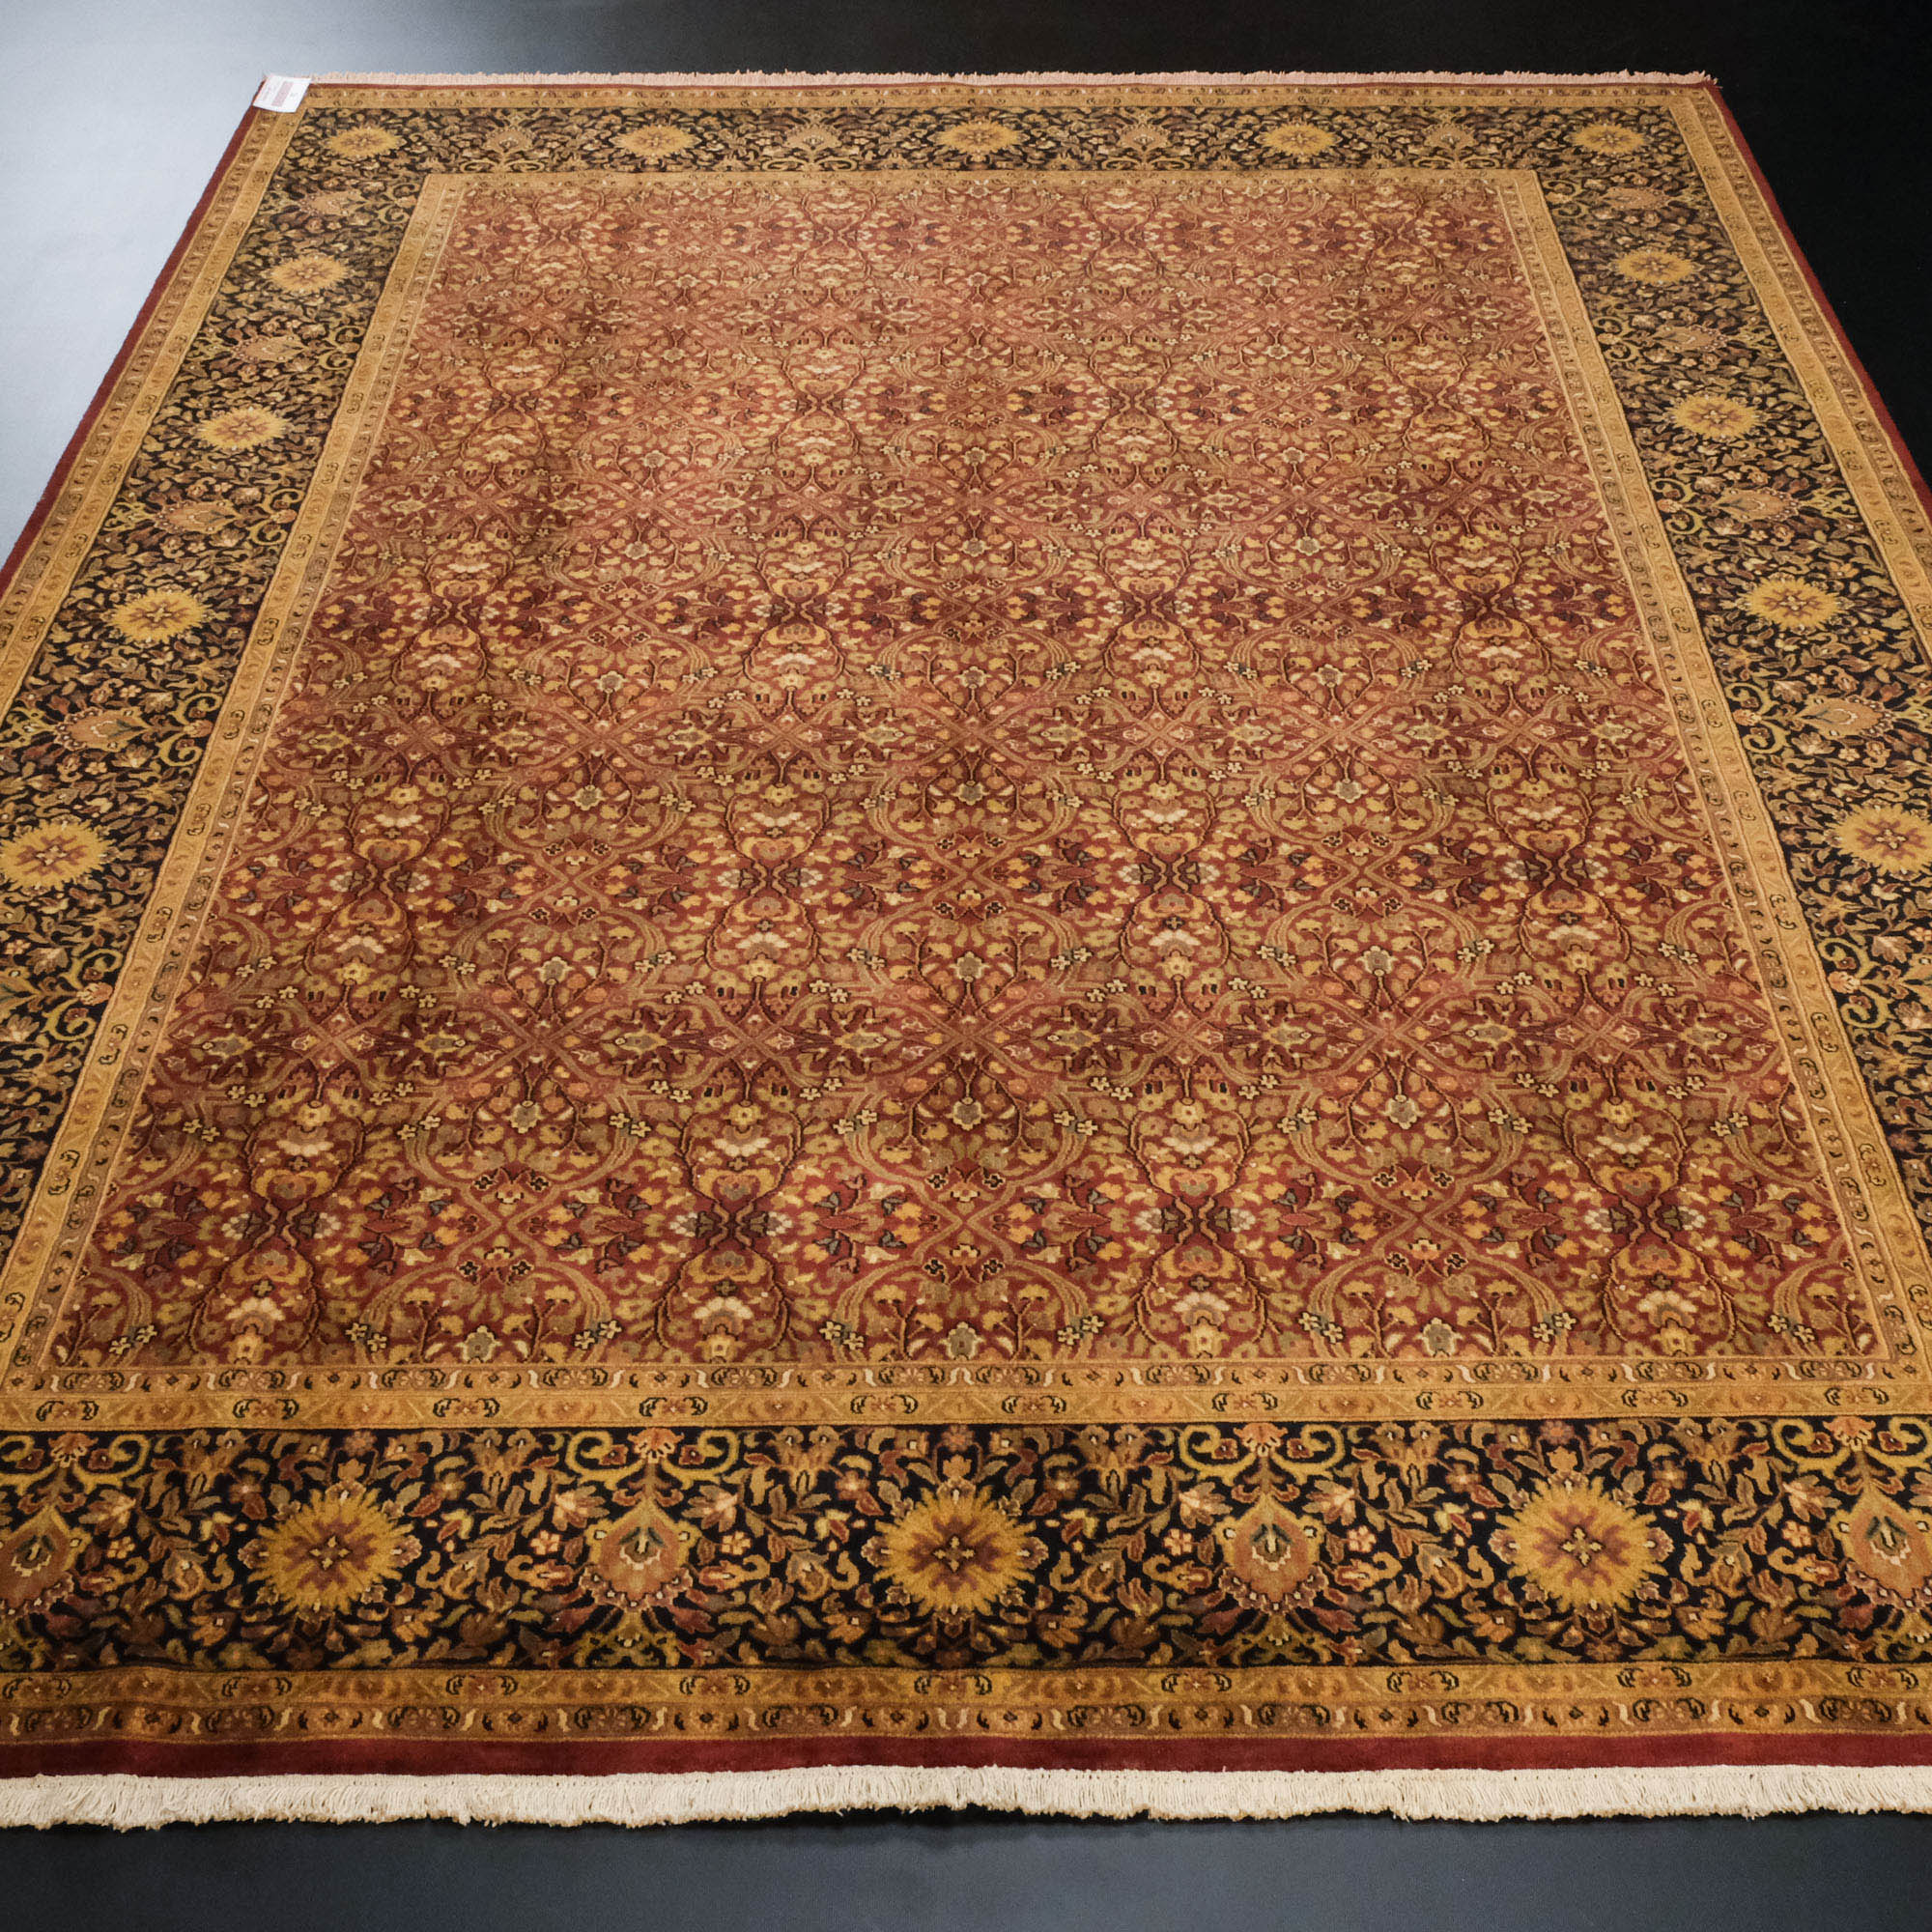 Hand-Woven Persian Patterned Brown Wool Carpet